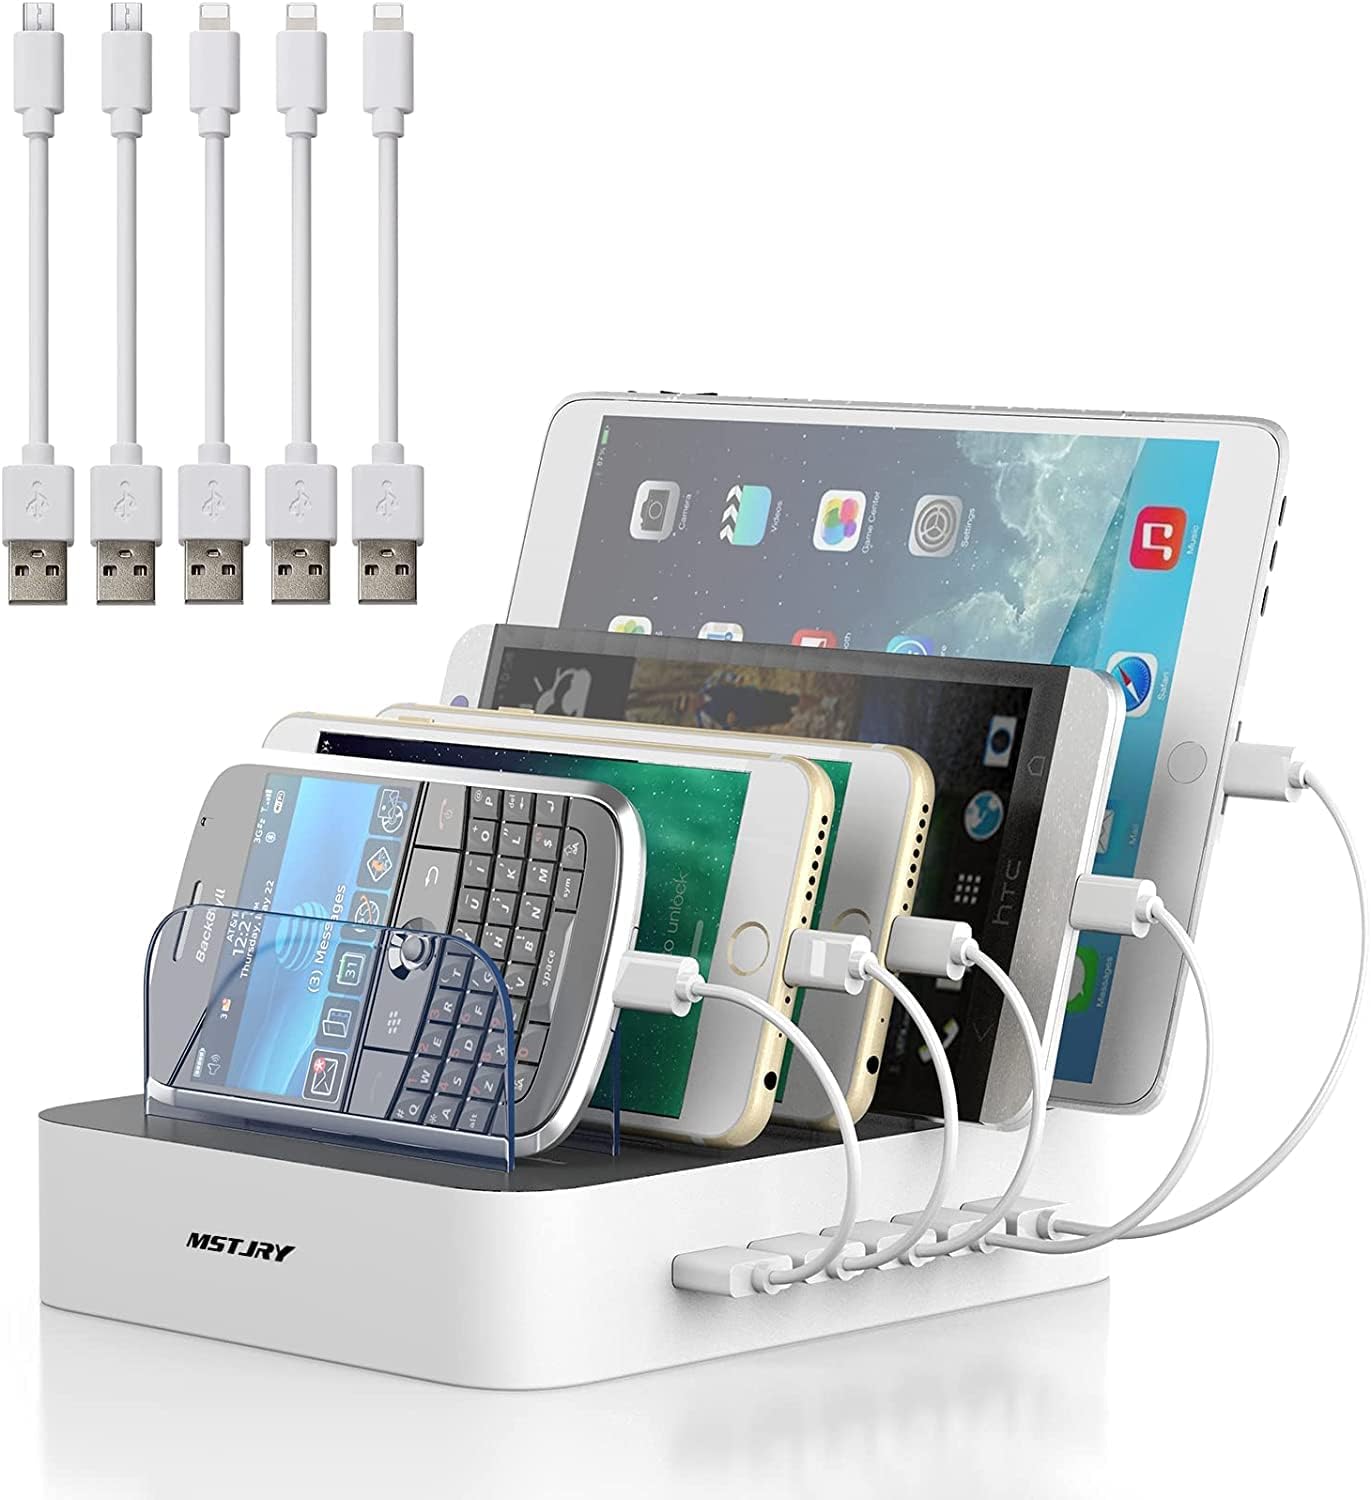 Charging Station for Multiple Devices, MSTJRY 5 Port [...]